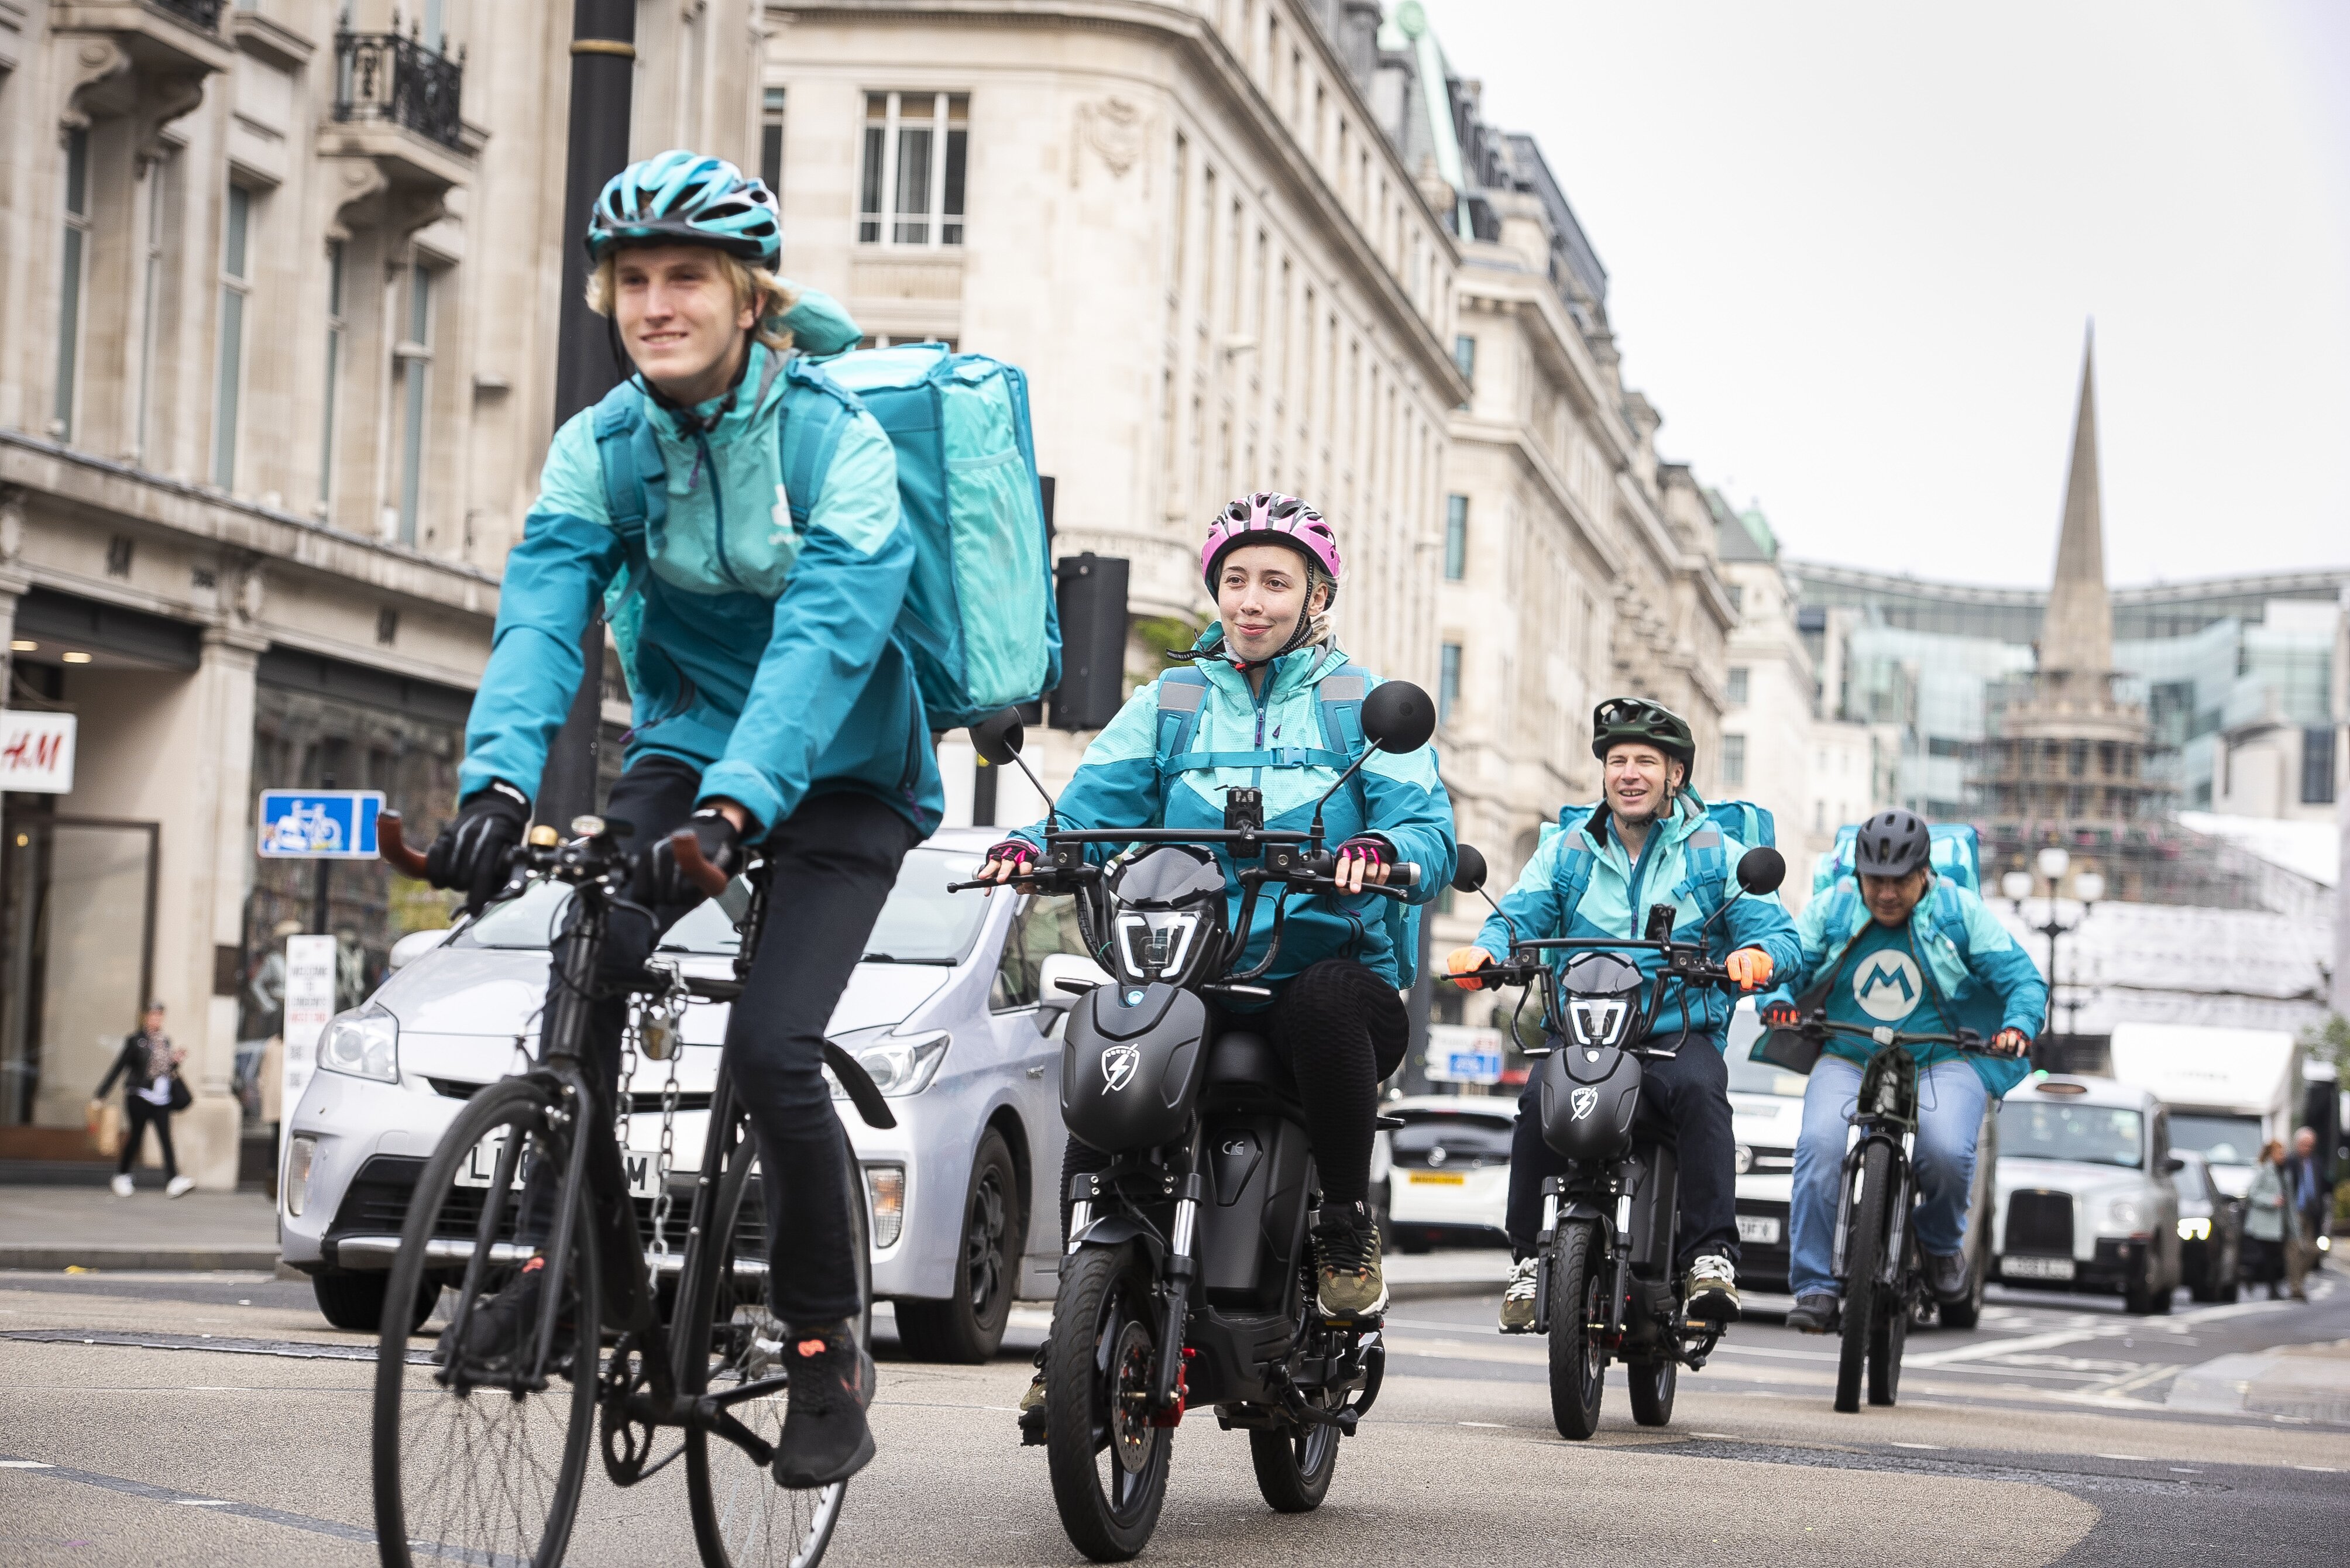 Deliveroo opens first high street grocery store in the UK